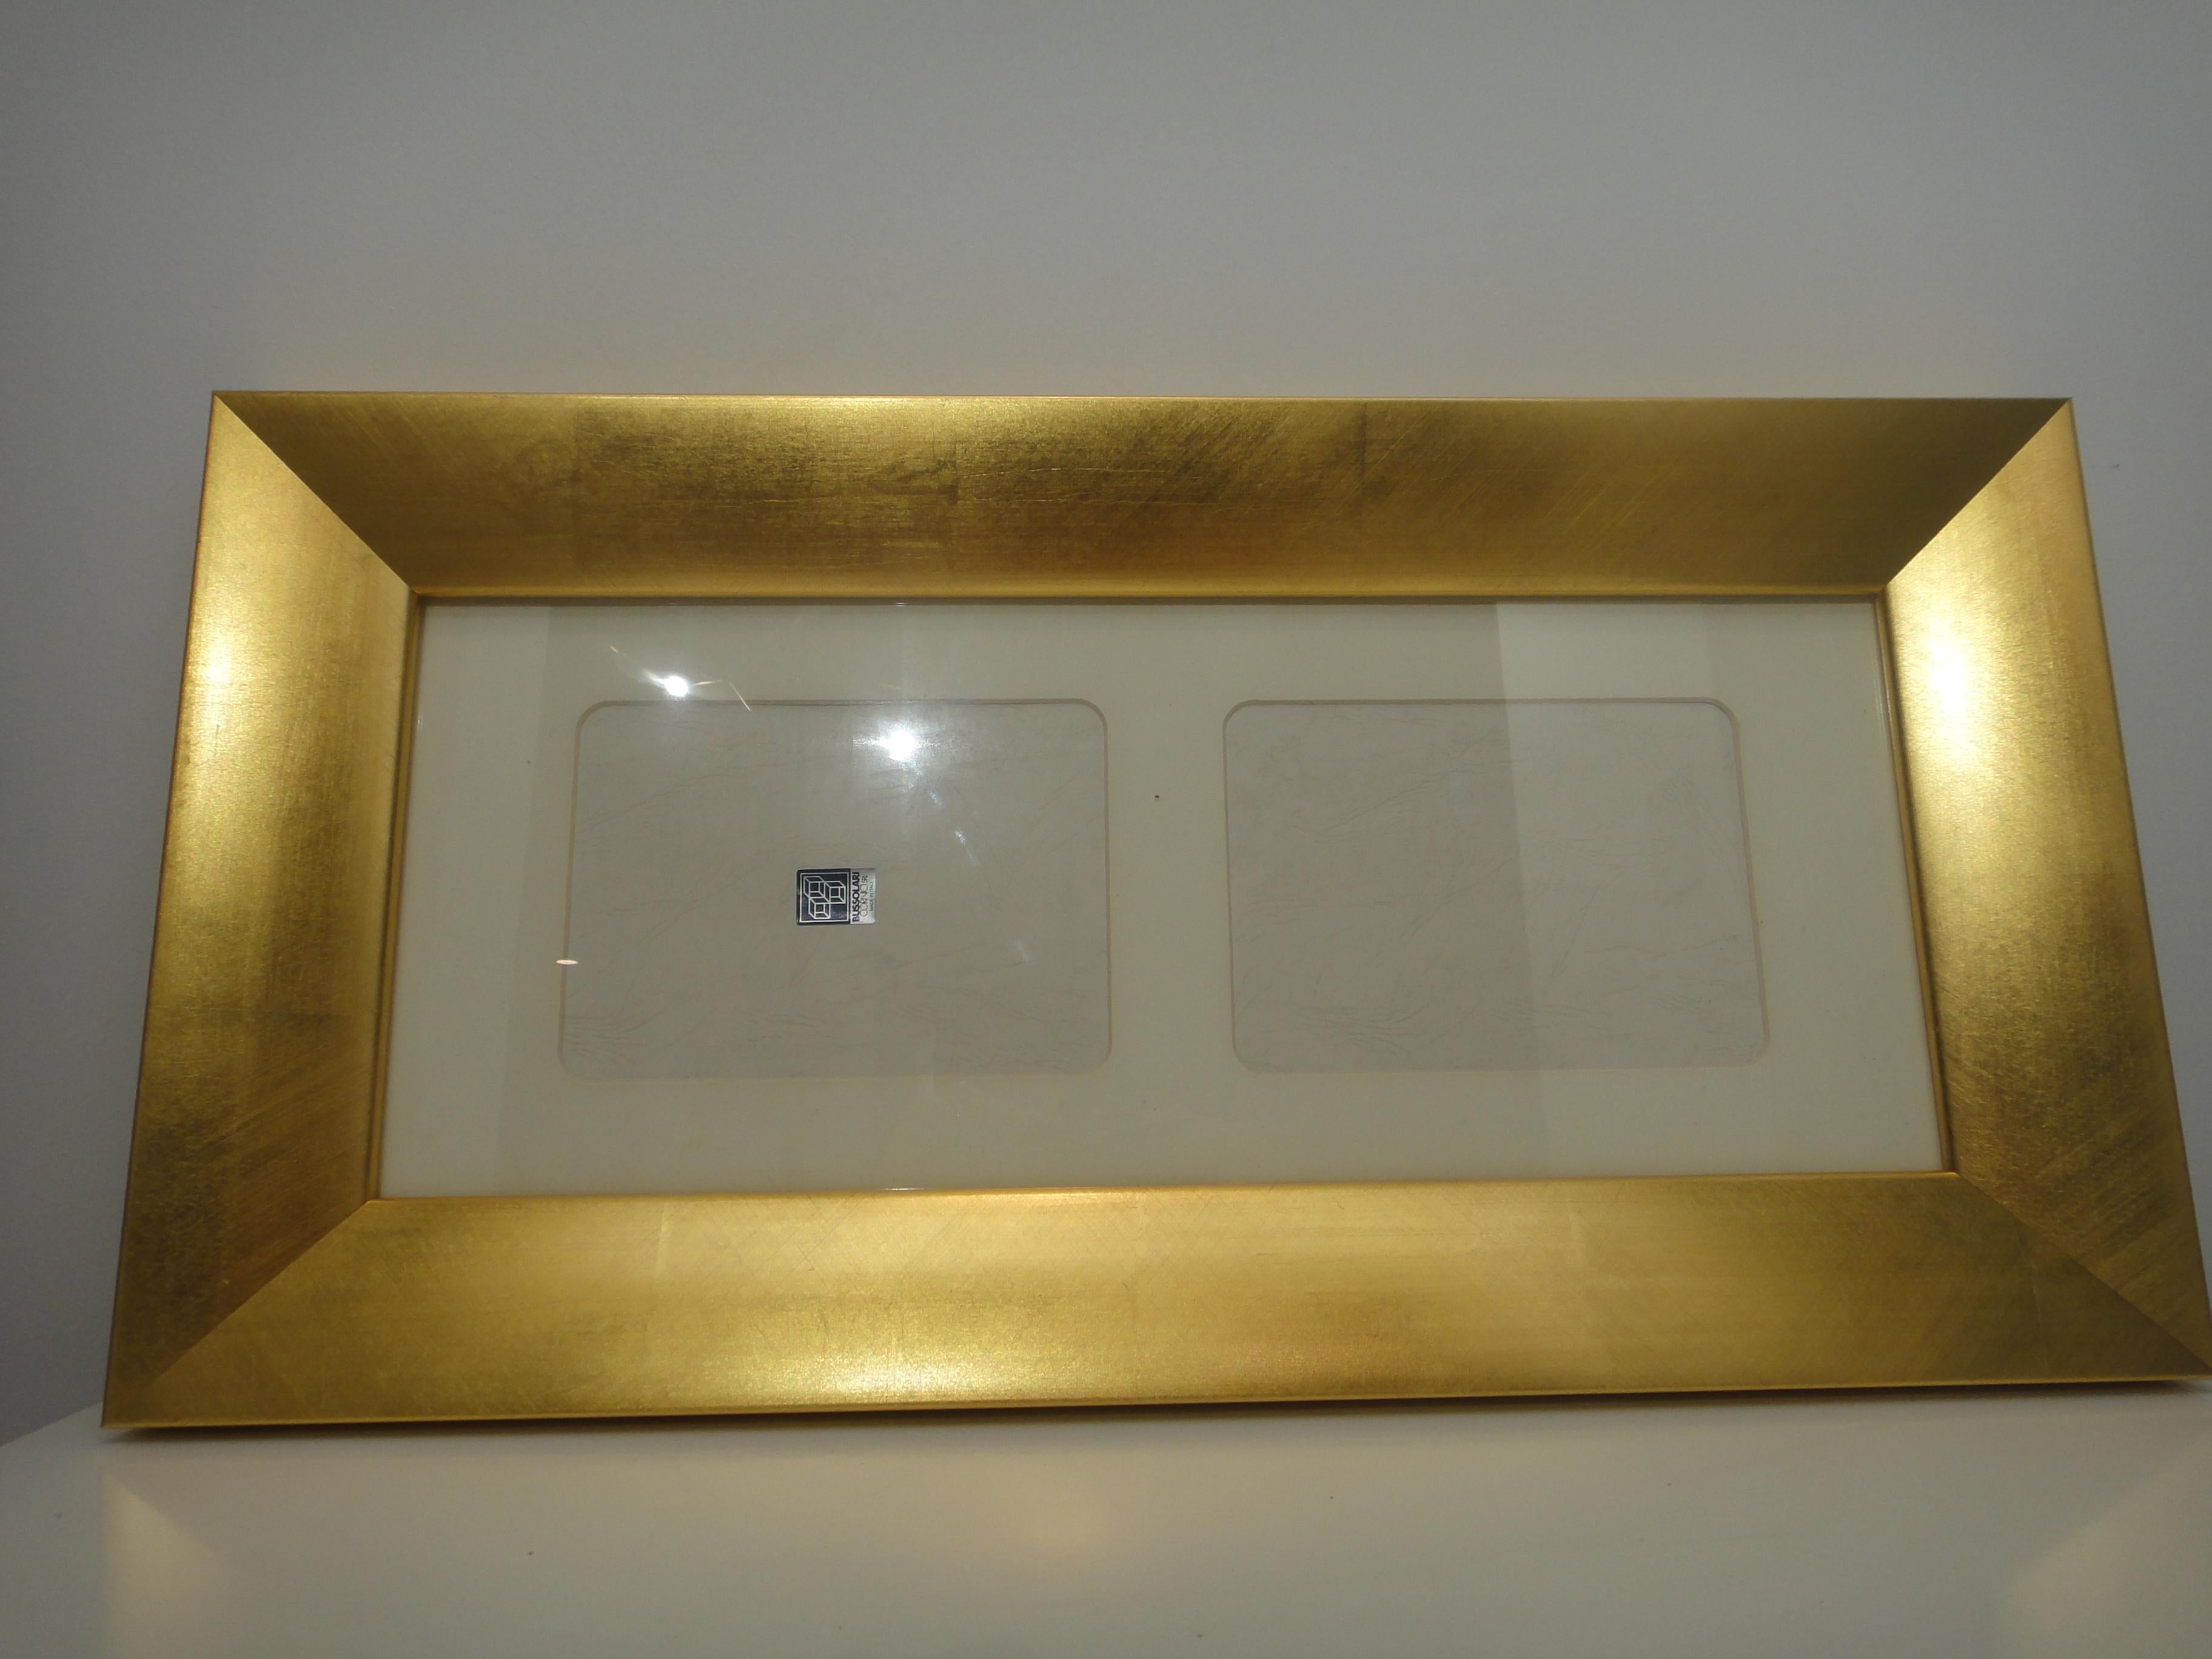 Bussolari giltwood double photo frame offered for sale is an elegant new giltwood double picture frame from Bussolari. The frame can be displayed vertically or horizontally.